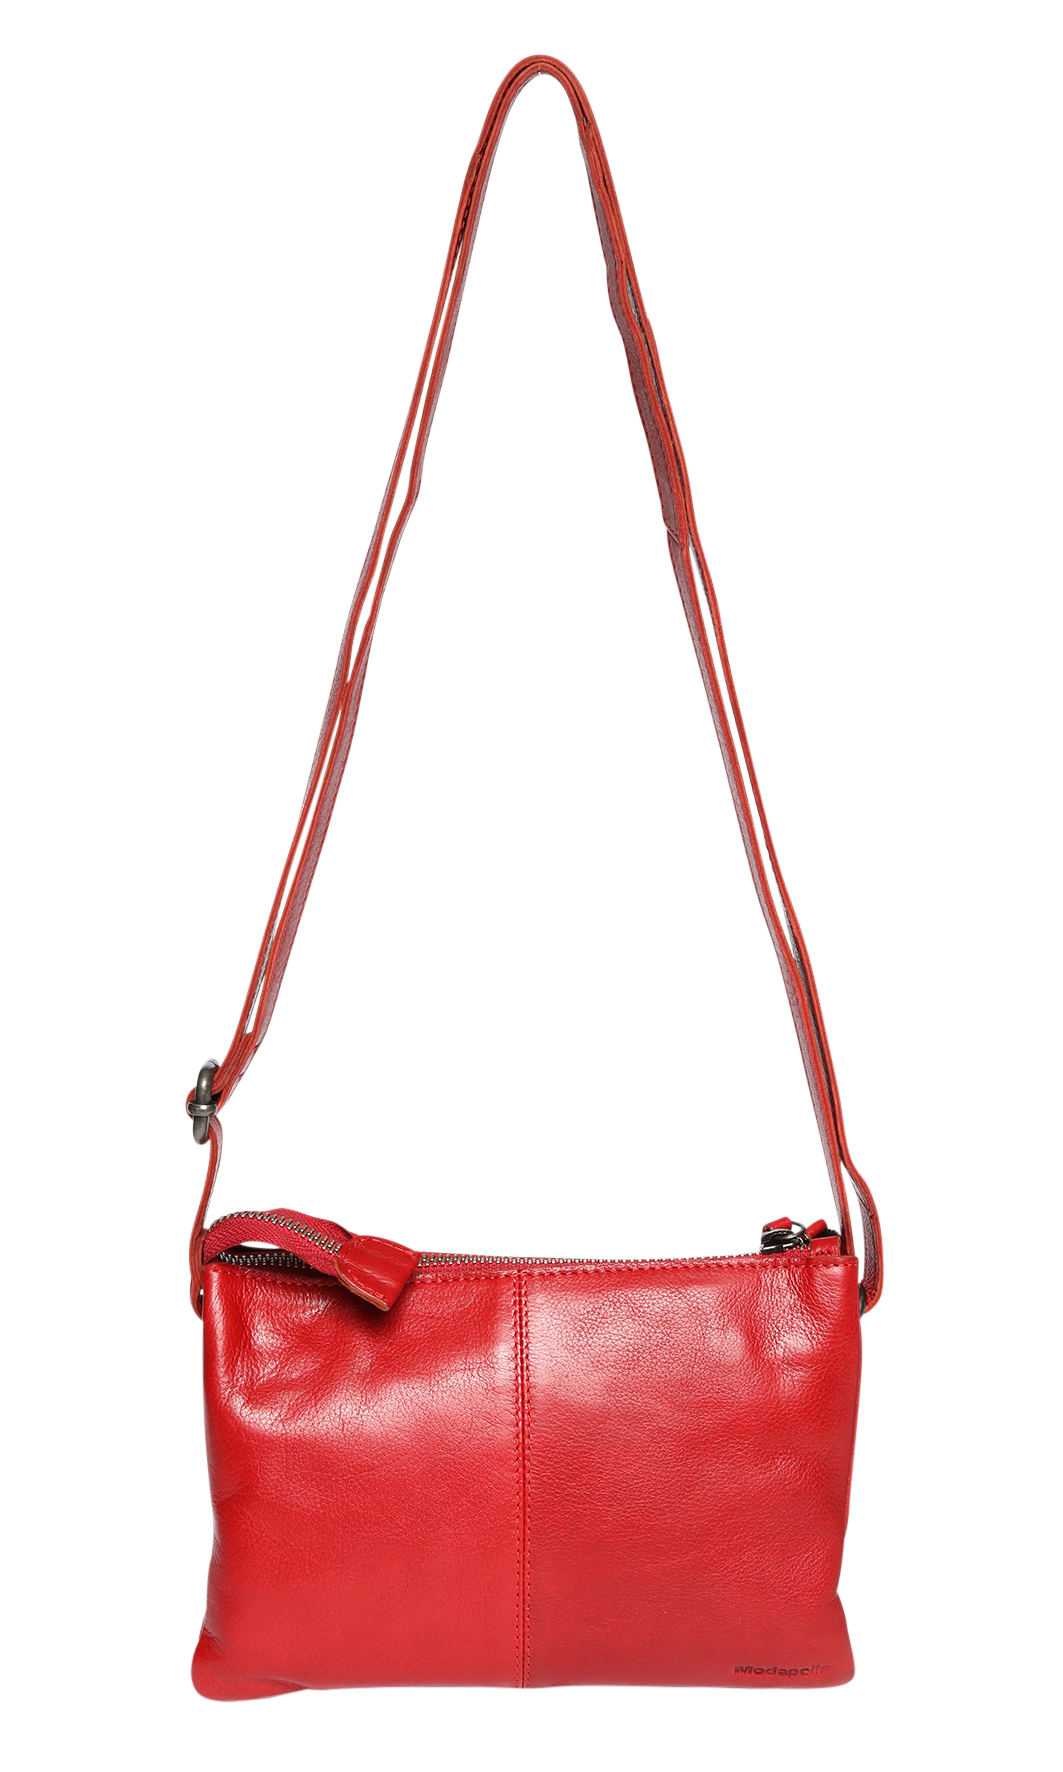 Leather Cross Body/Leather Shoulder Bag 6316 Red - Modapelle Direct